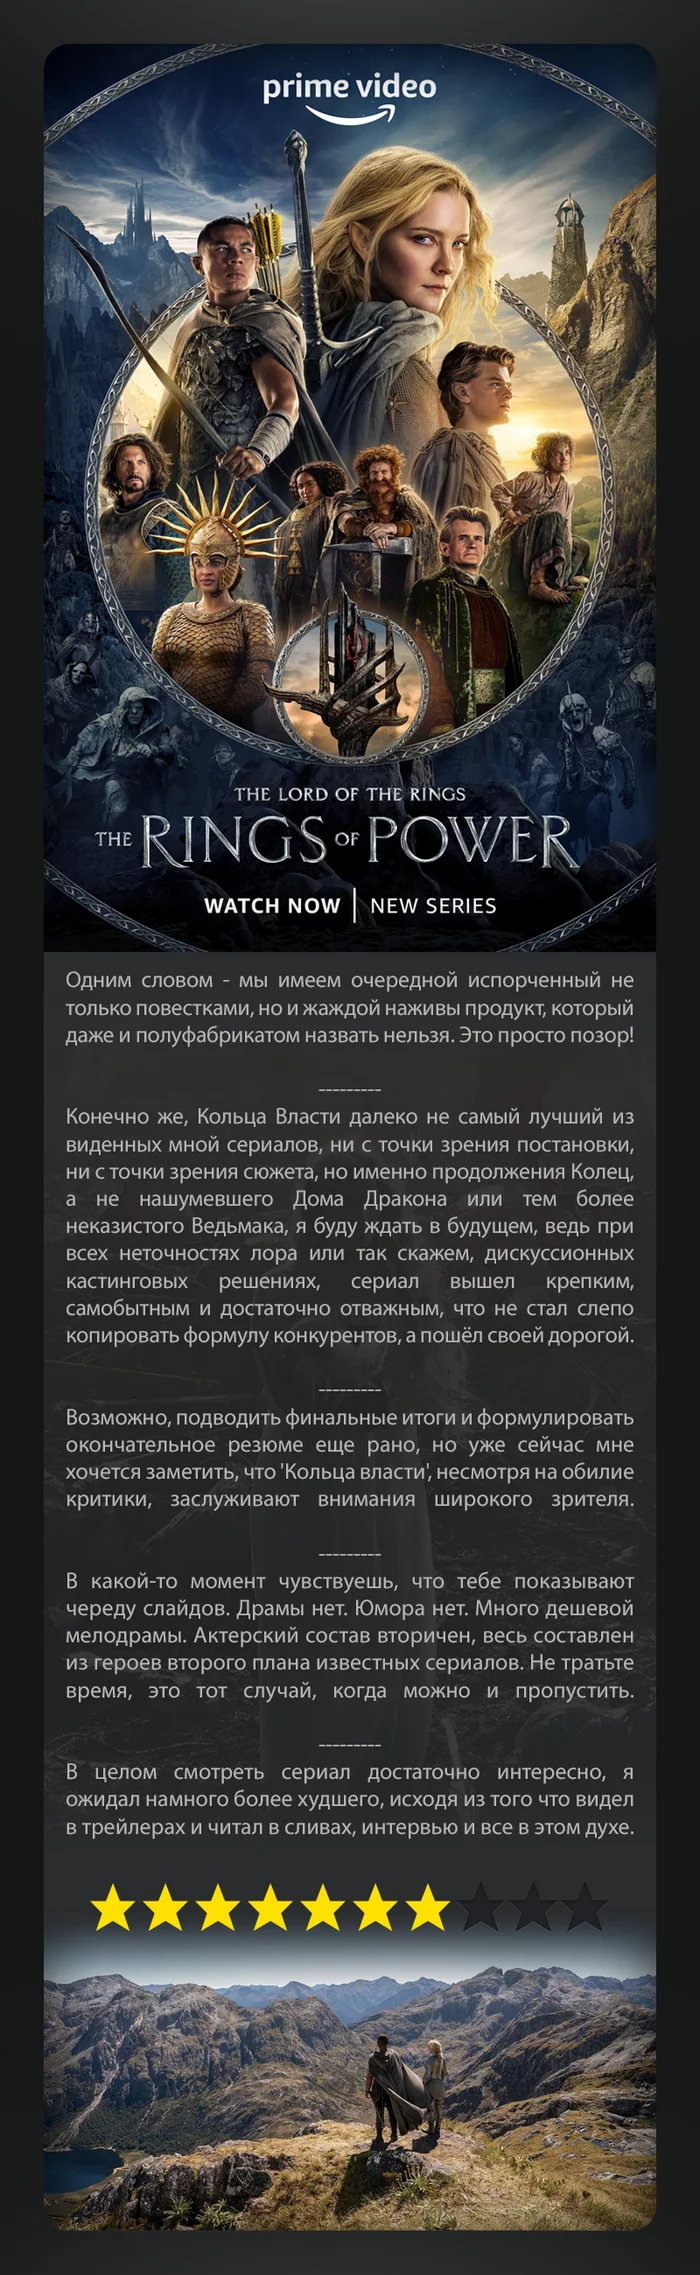 The Lord of the Rings: The Rings of Power/Season 1/2022 - Rating, Grade, Serials, I advise you to look, Longpost